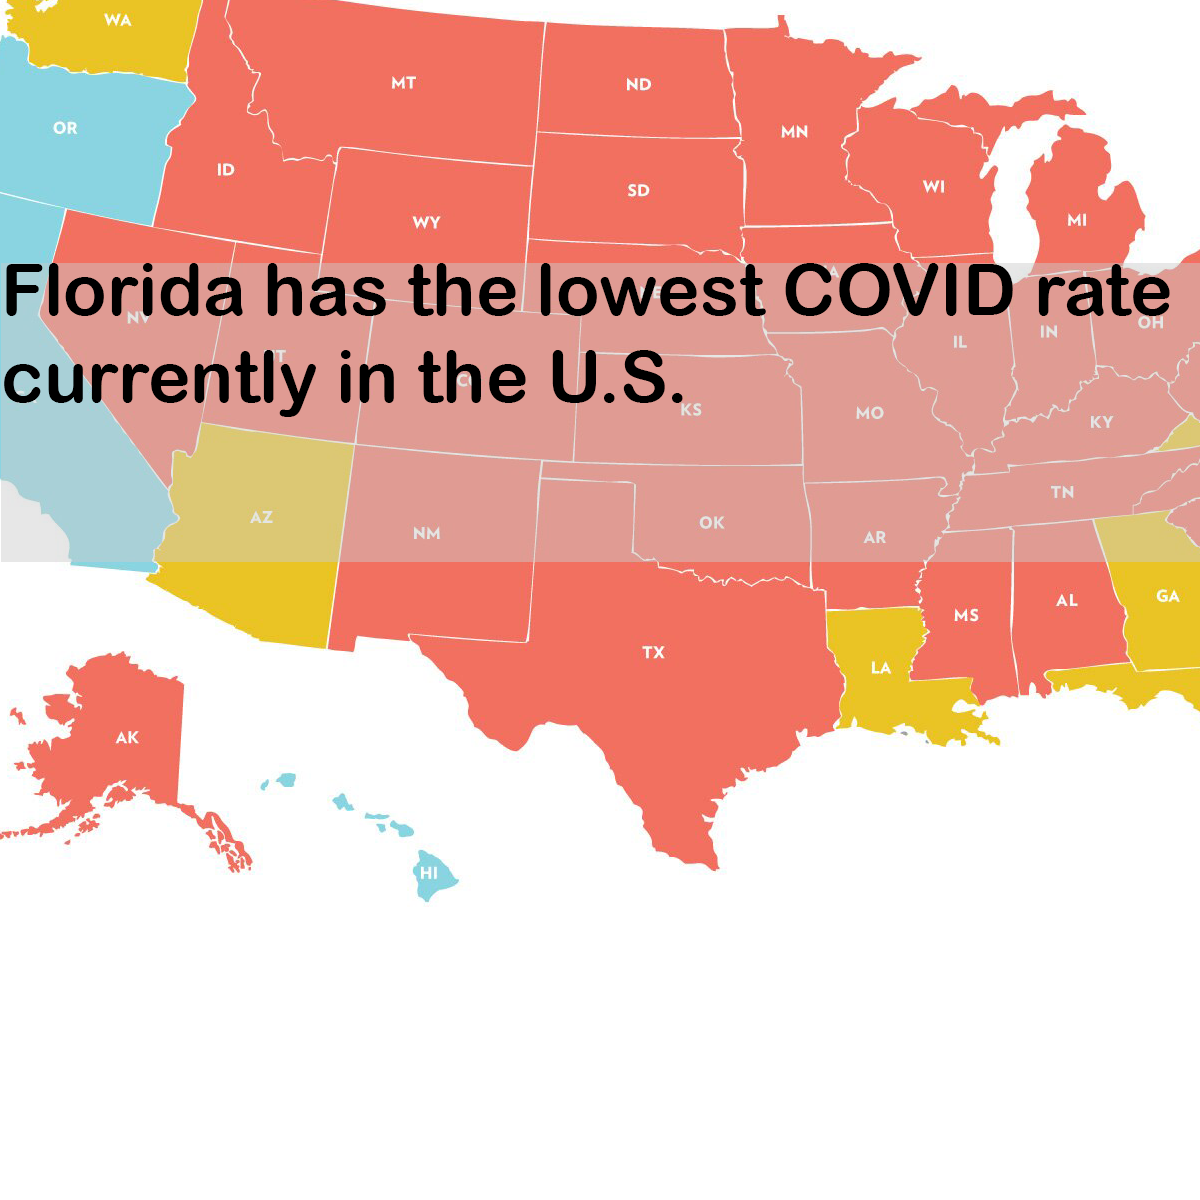 Florida has the lowest COVID rate currently in the U.S.